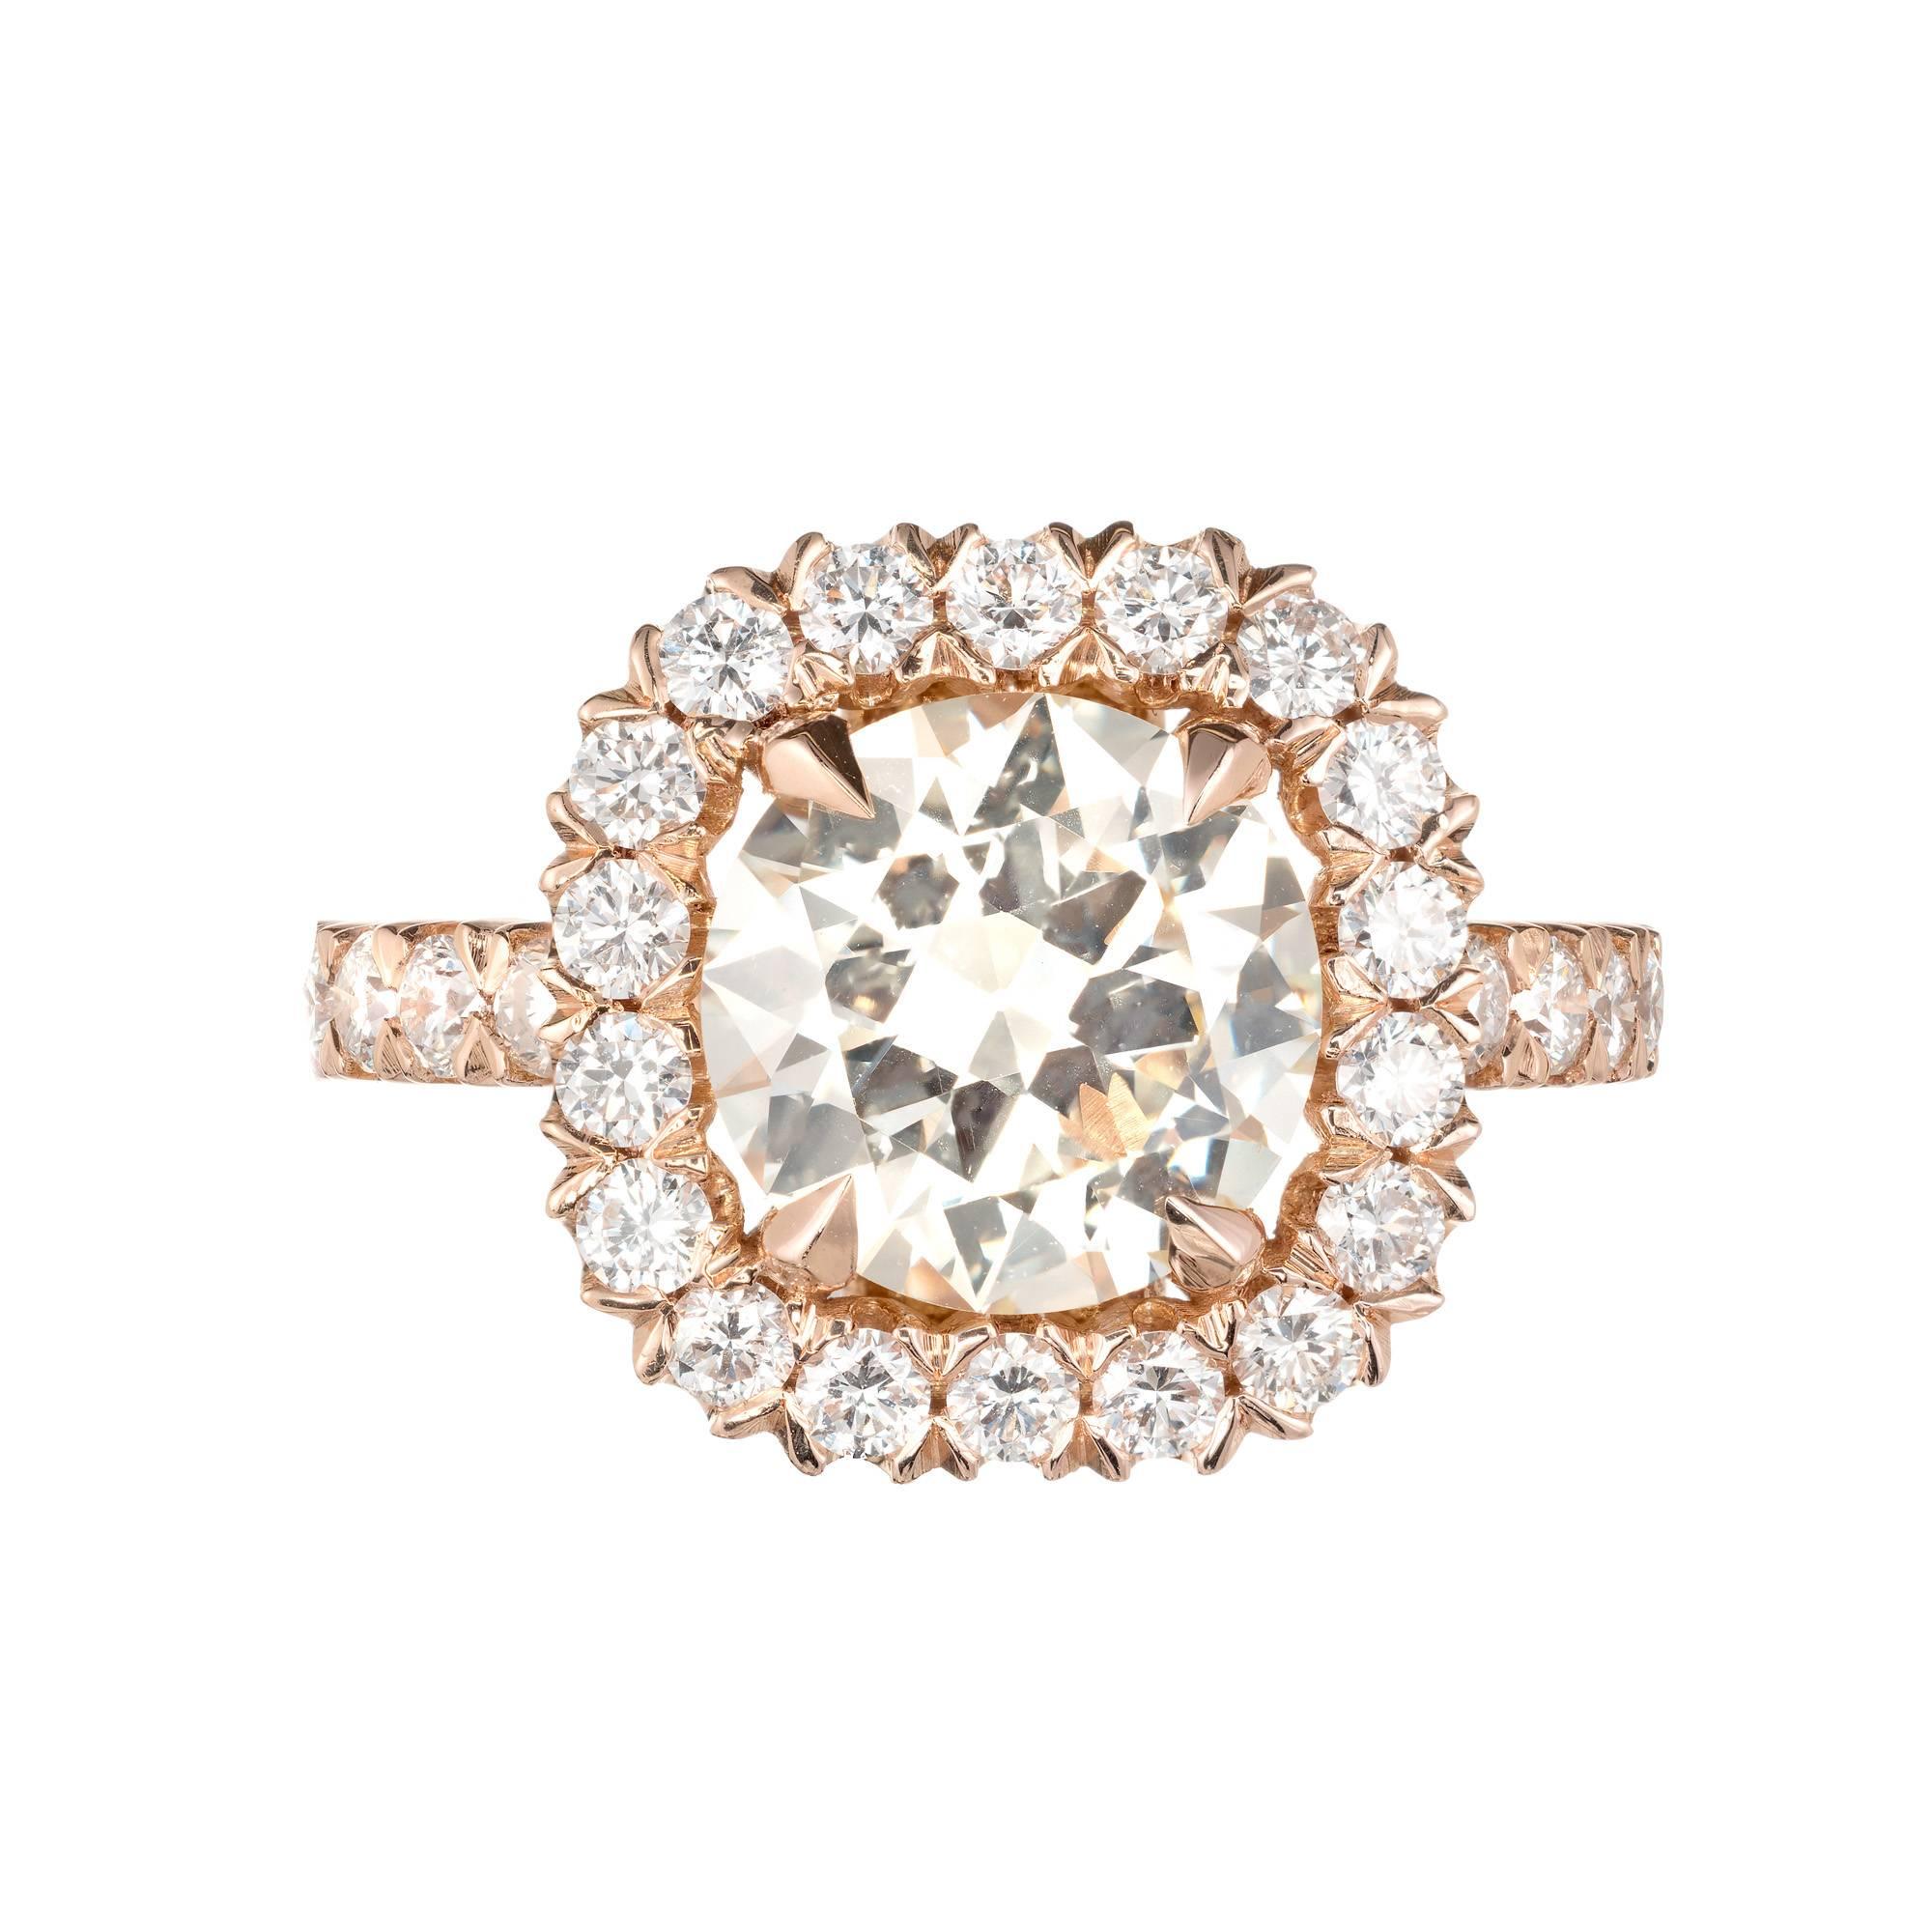 2.43ct transitional ideal cut diamond halo engagement ring. GIA certified center stone with a halo of full cut round diamonds in a 18k rose gold setting with accent diamonds along the shank. The center diamond has wonderful brilliance with a warm